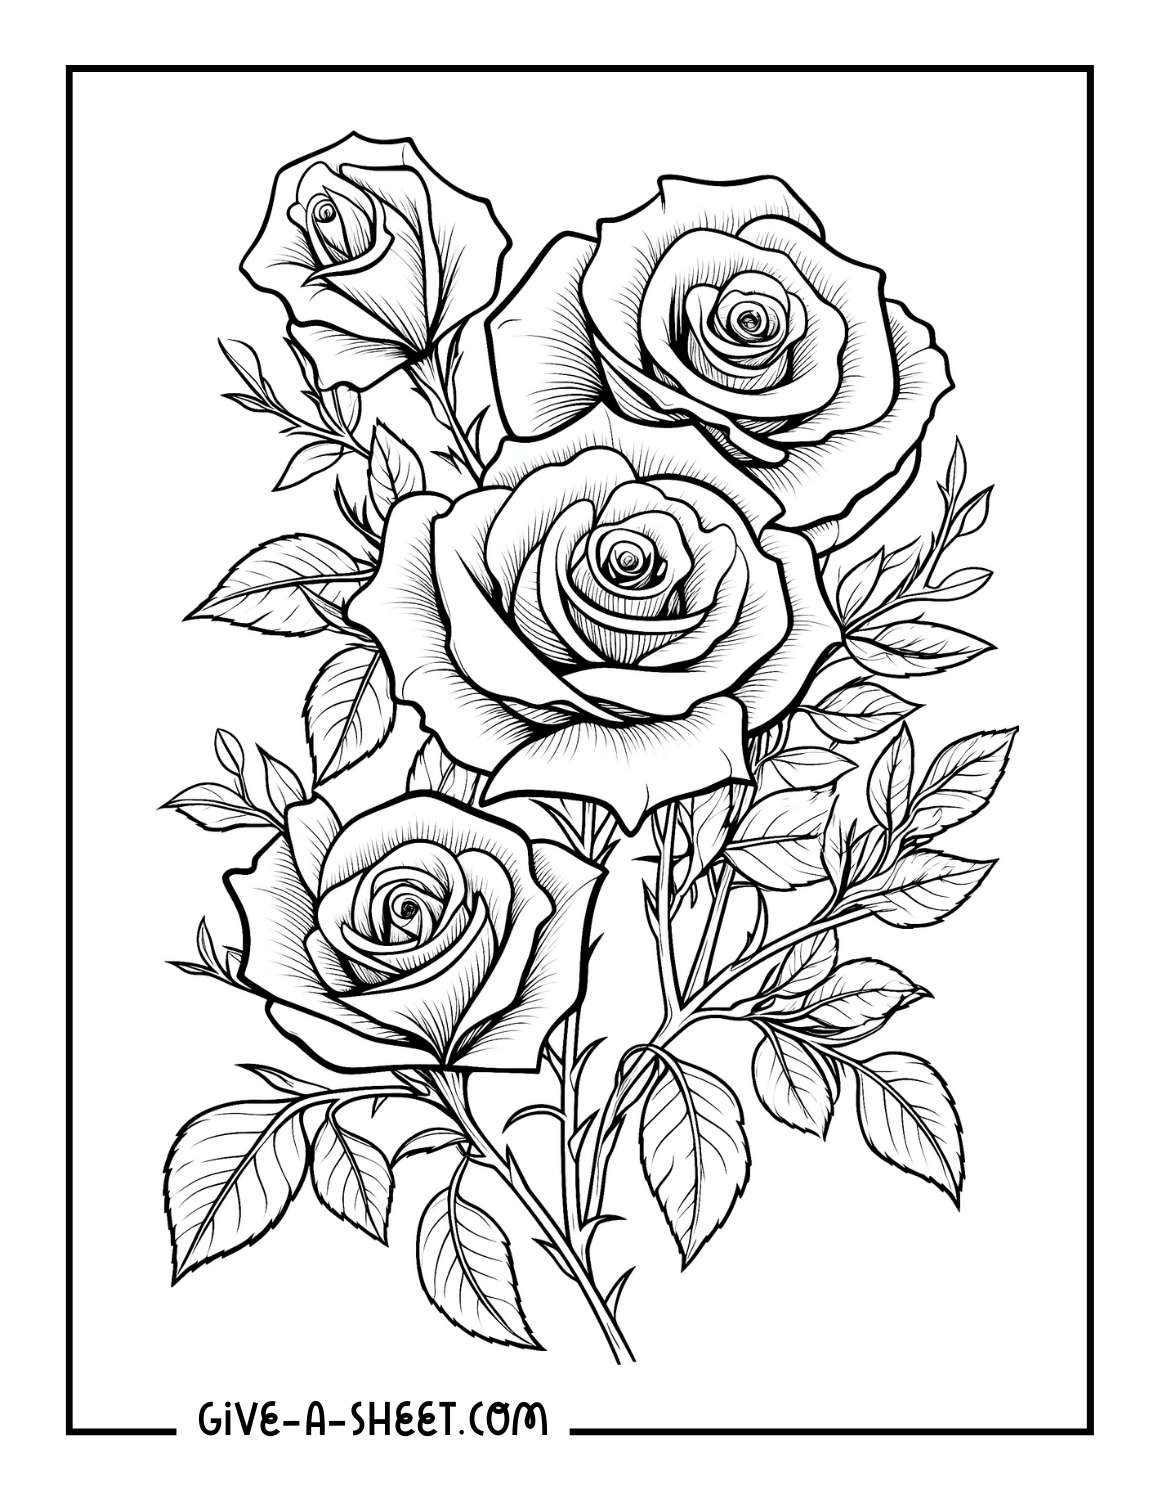 Four roses with leaves tattoo coloring page.